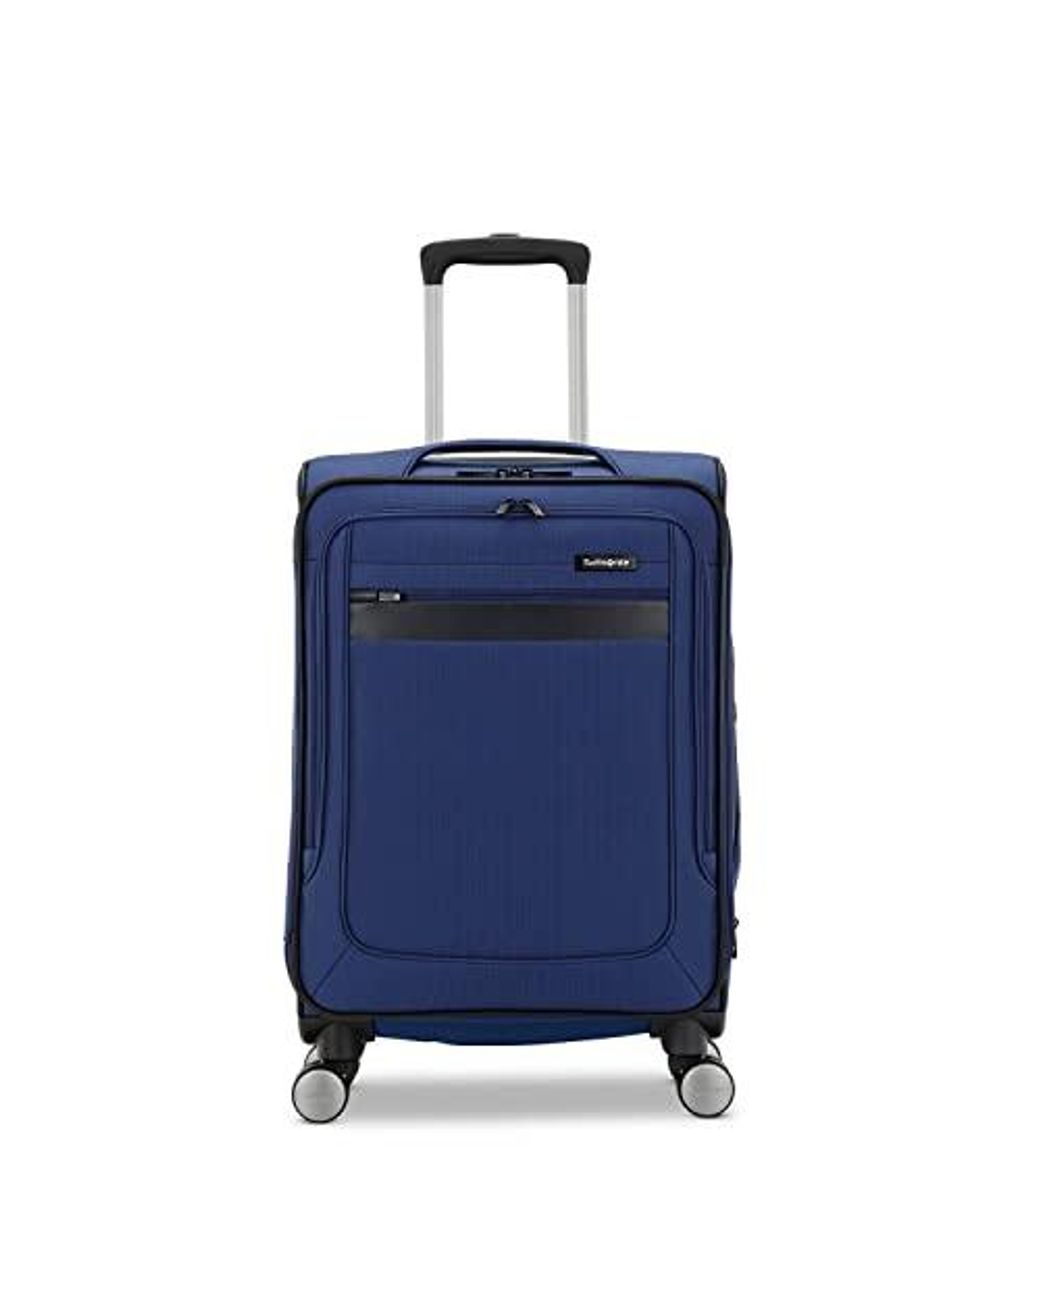 Samsonite Ascella 3.0 Softside Expandable Luggage With Spinners | Light ...